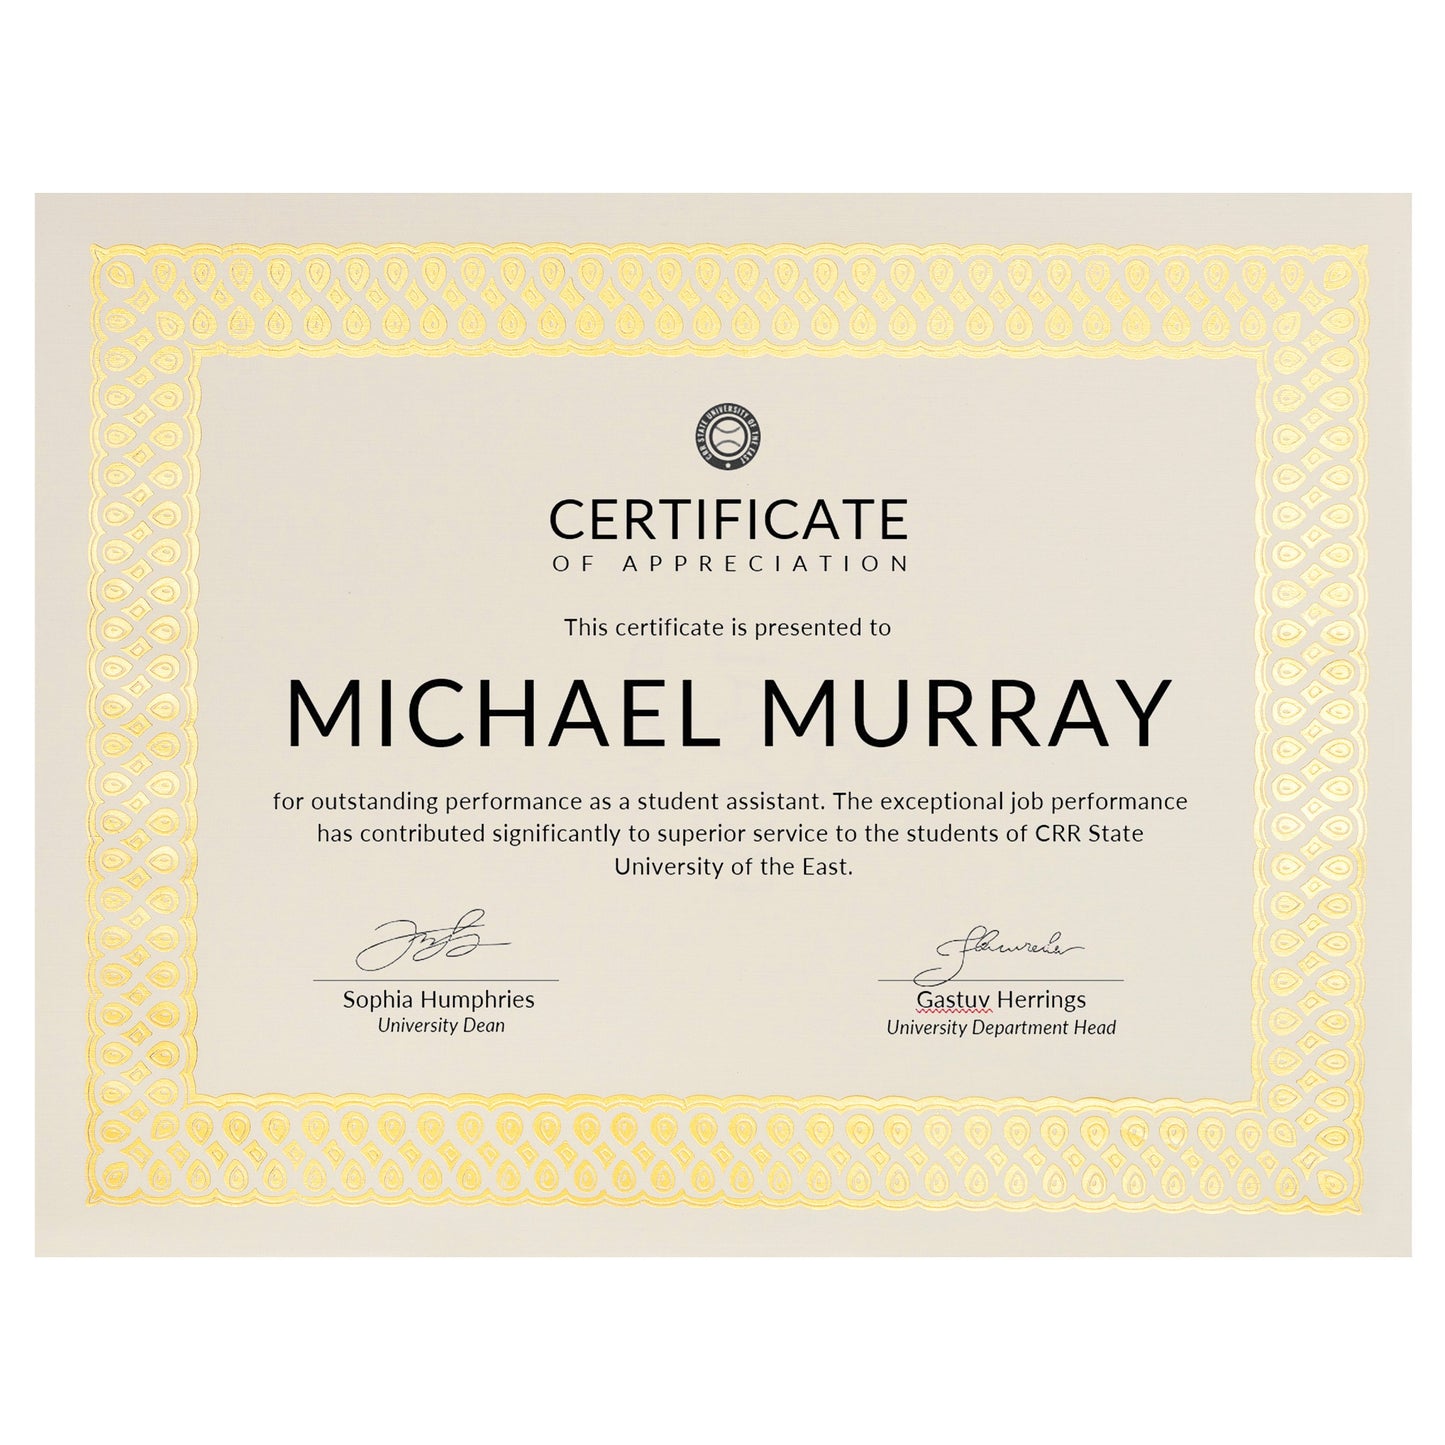 St. James® Elite™ Certificates, Natural Linen with Classic Gold Foil Design, Pack of 100